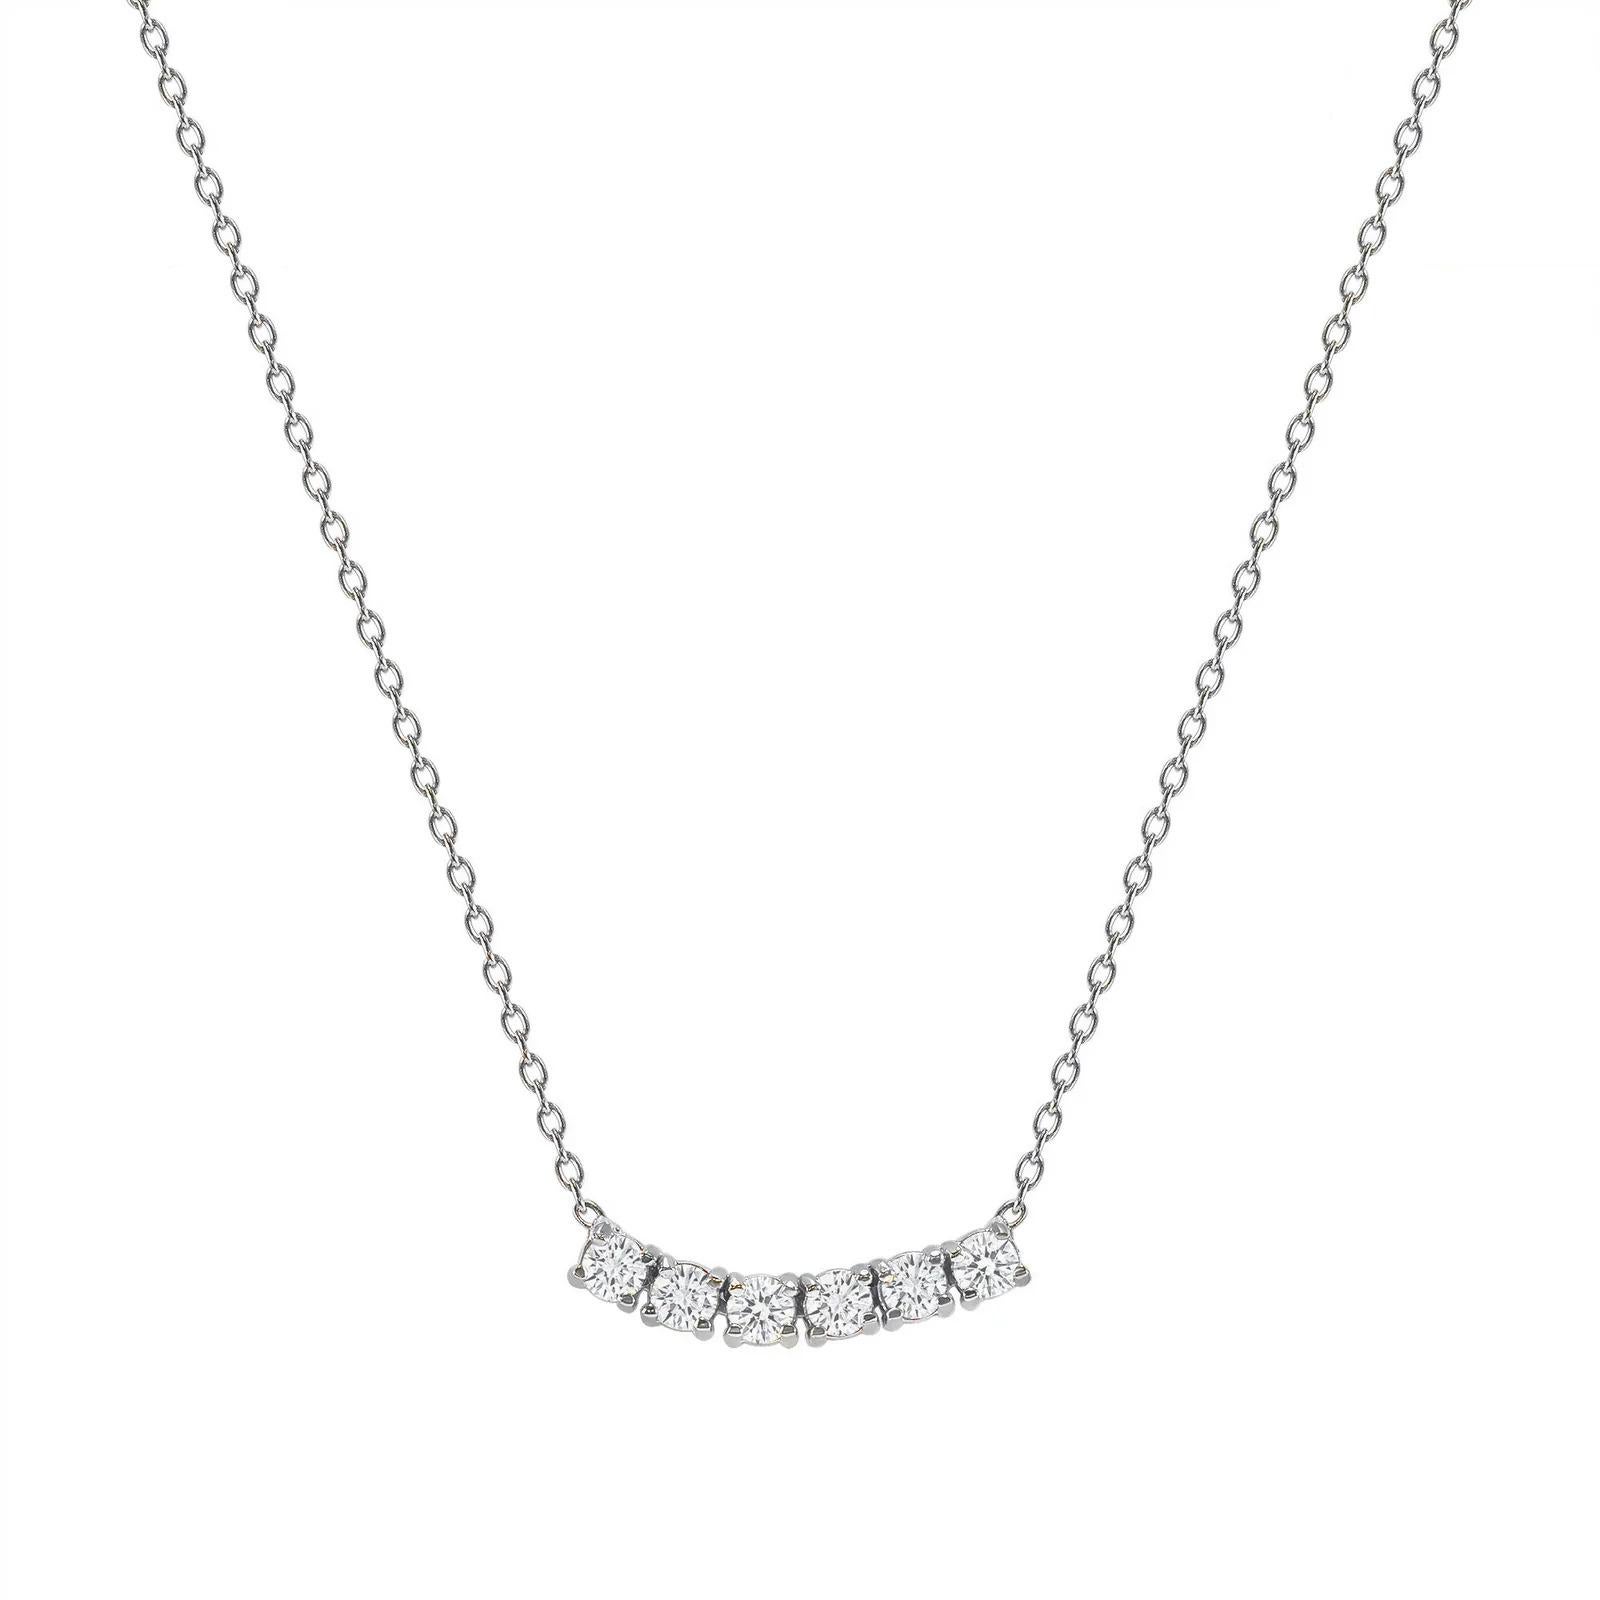 This petite, curved diamond necklace is crafted with gorgeous 14k gold set with six round diamonds.  

Gold: 14k 
Diamond Total Carats: 0.50ct
Diamond Cut: Round (6 diamonds)
Diamond Clarity: VS
Diamond Color: F
Color: White Gold
Necklace Length: 24